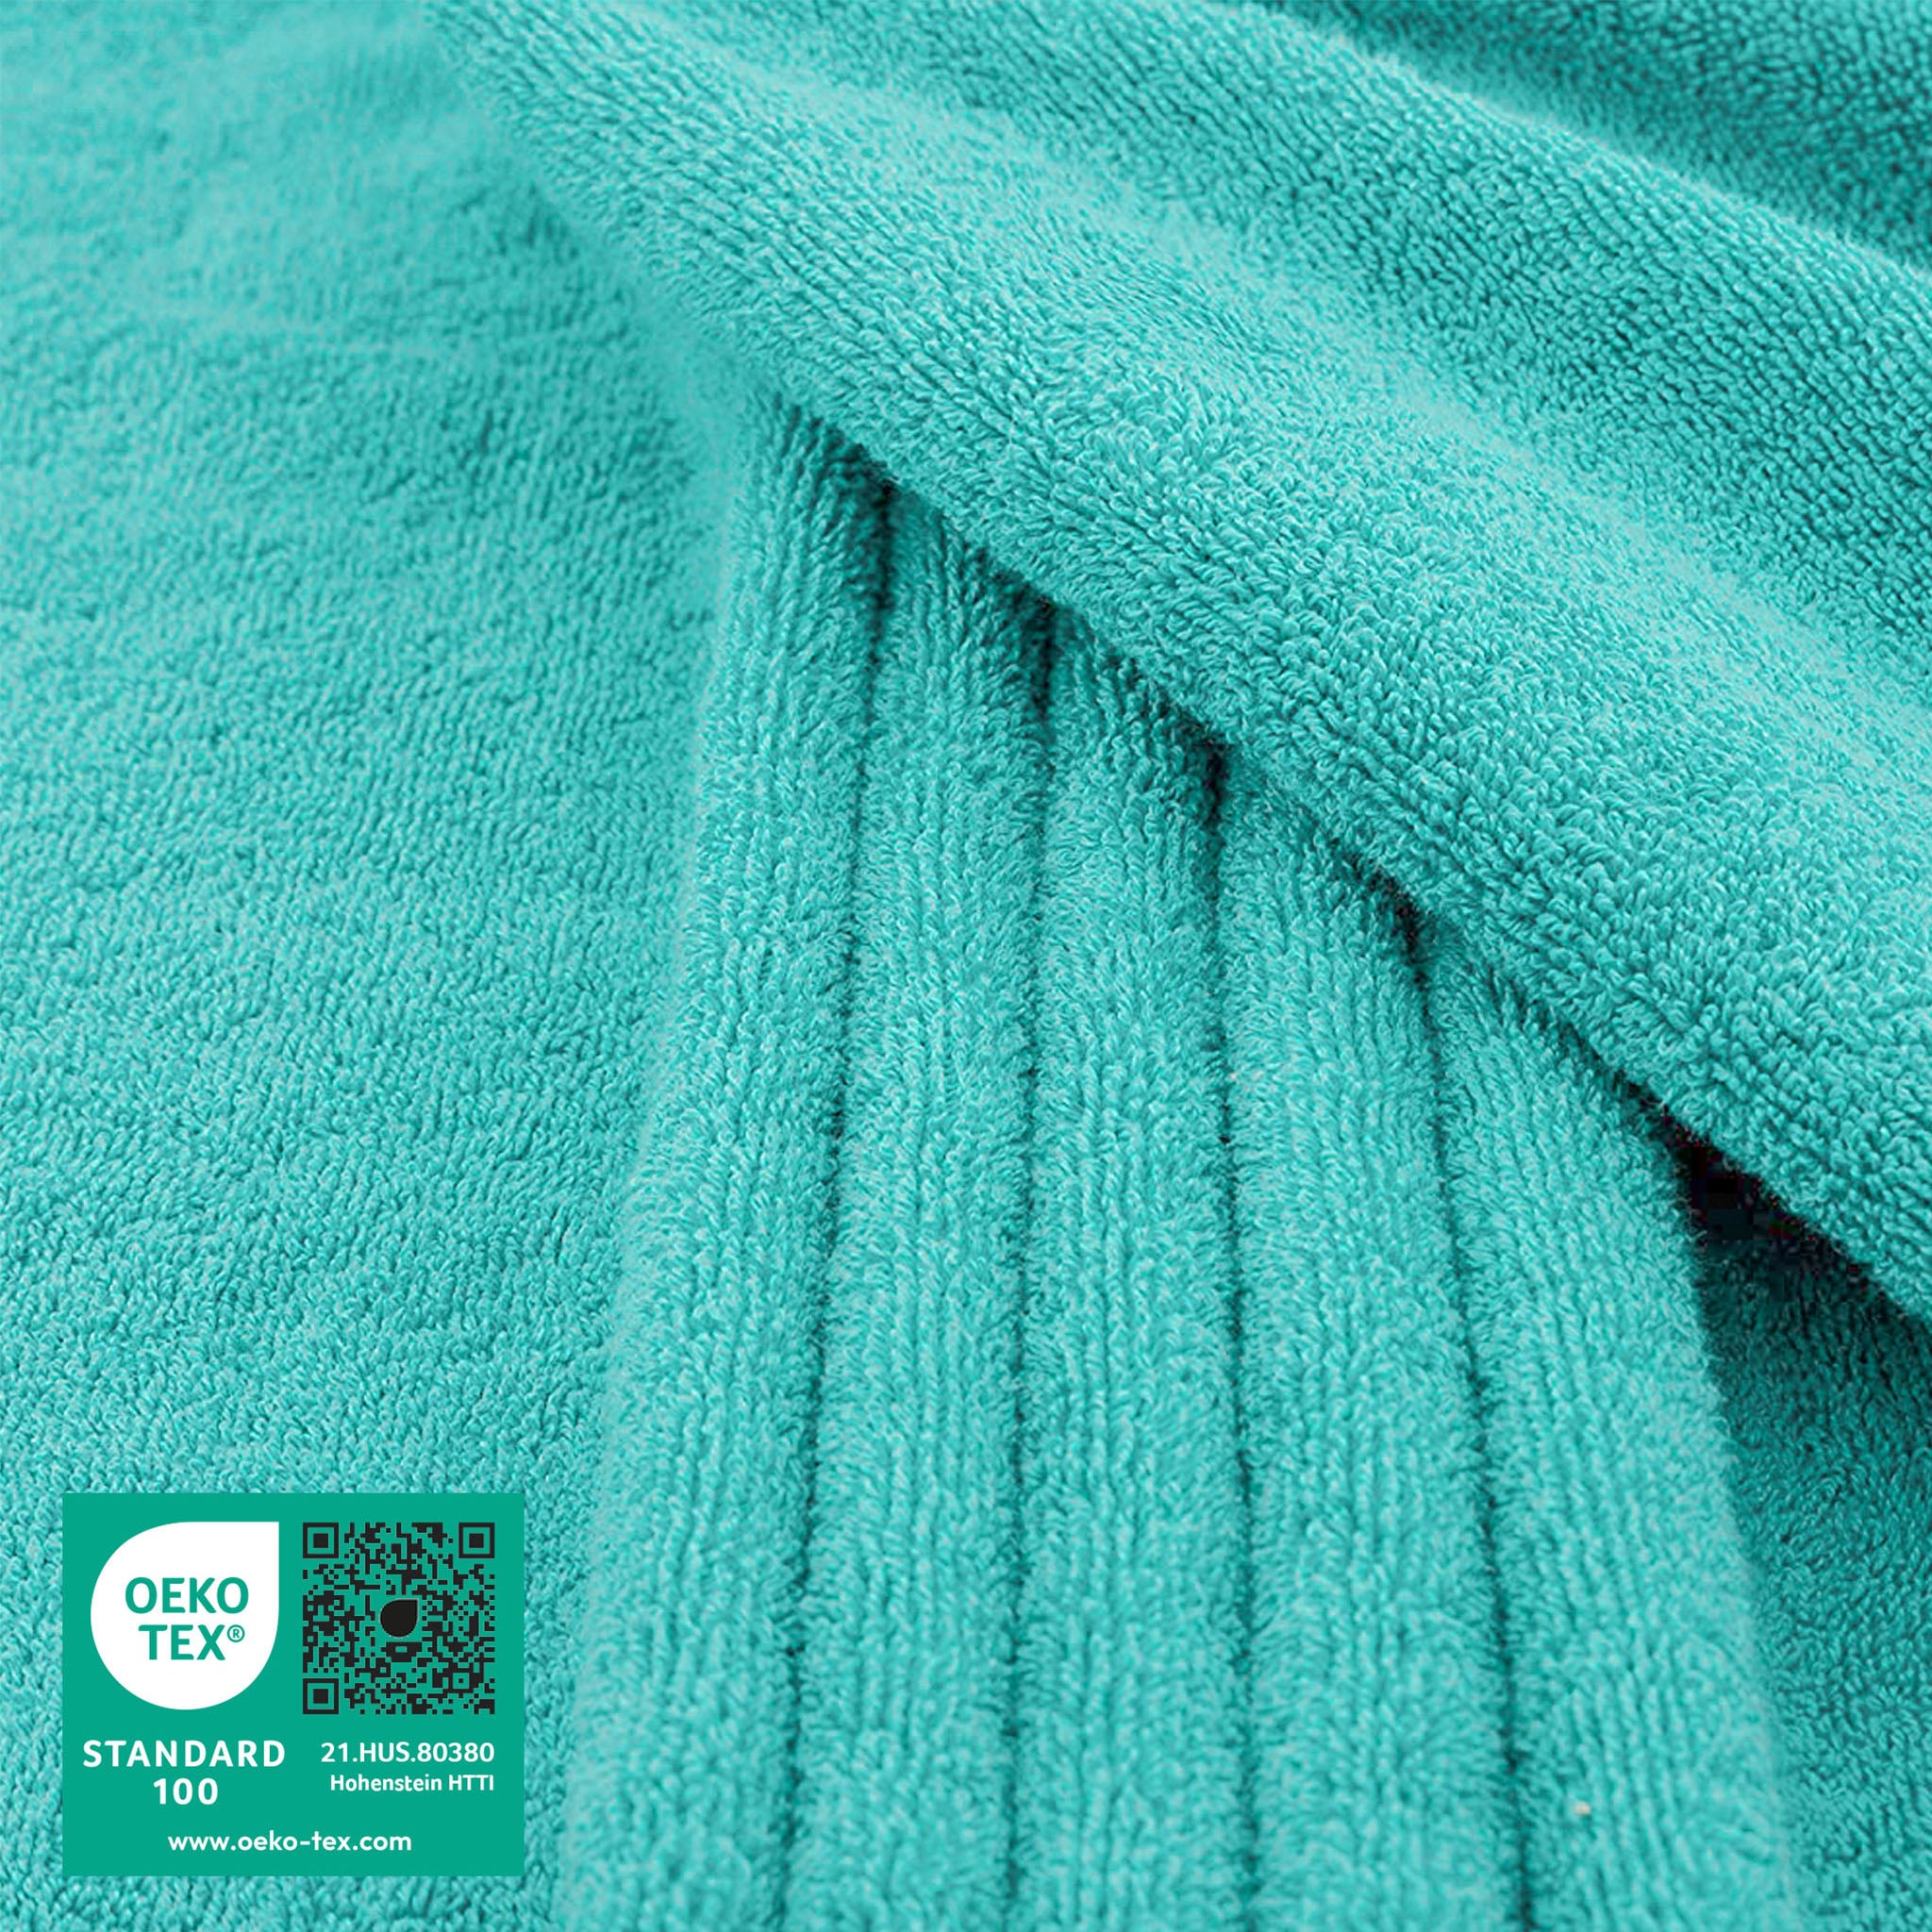 American Soft Linen 100% Ring Spun Cotton 40x80 Inches Oversized Bath Sheets turquoise-blue-2